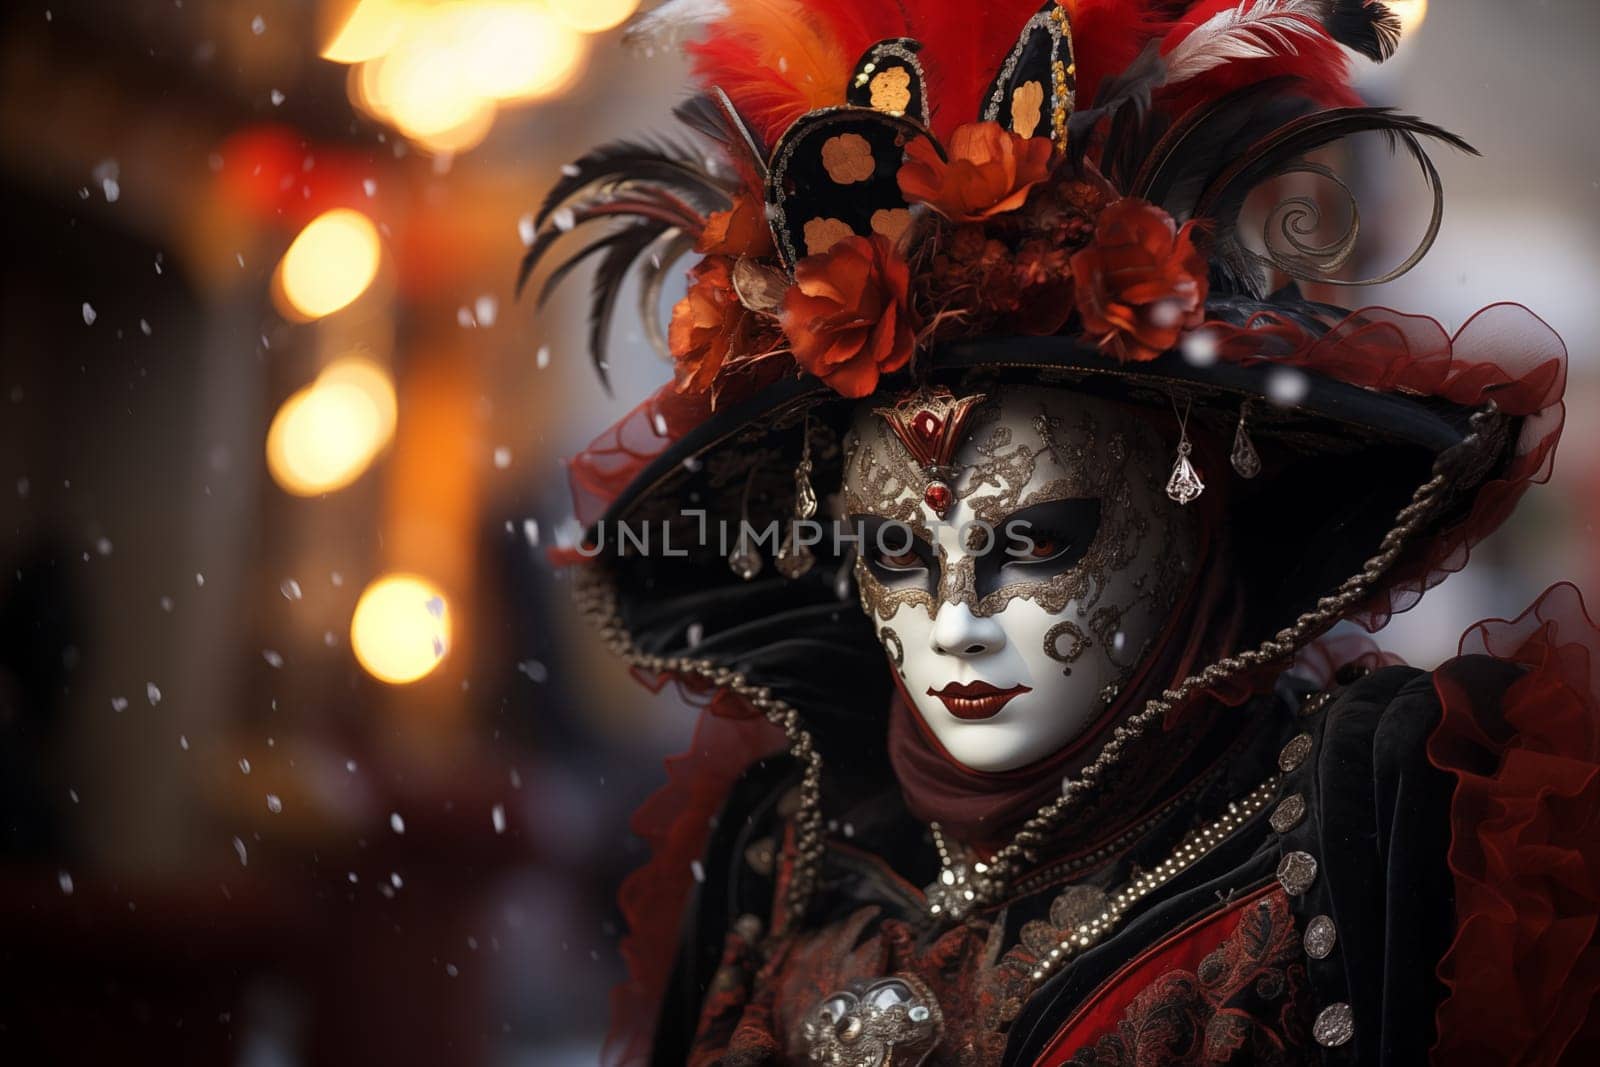 A person adorned in a richly detailed and colorful carnival costume, complete with an elaborate mask, participates in the iconic Venice Carnival with snowfall